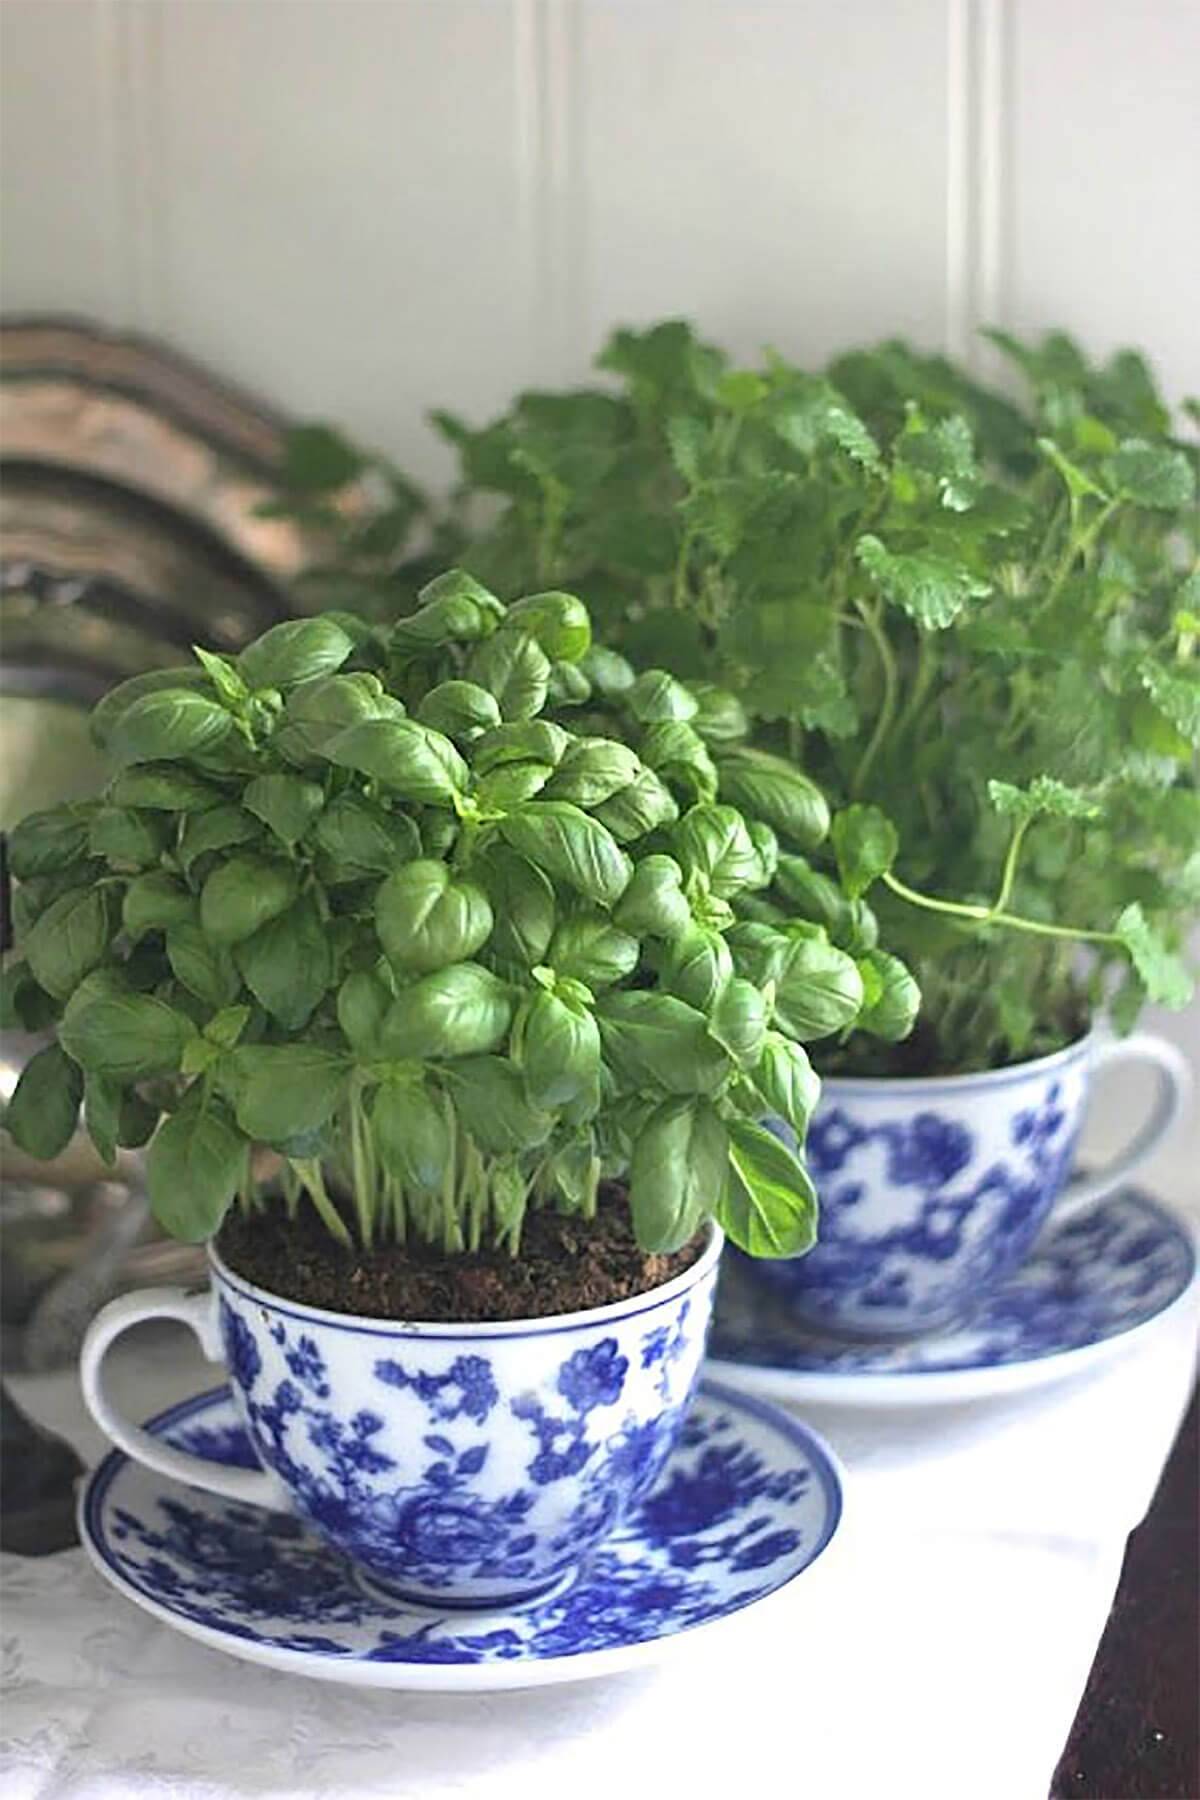 blue china teacup with herbs